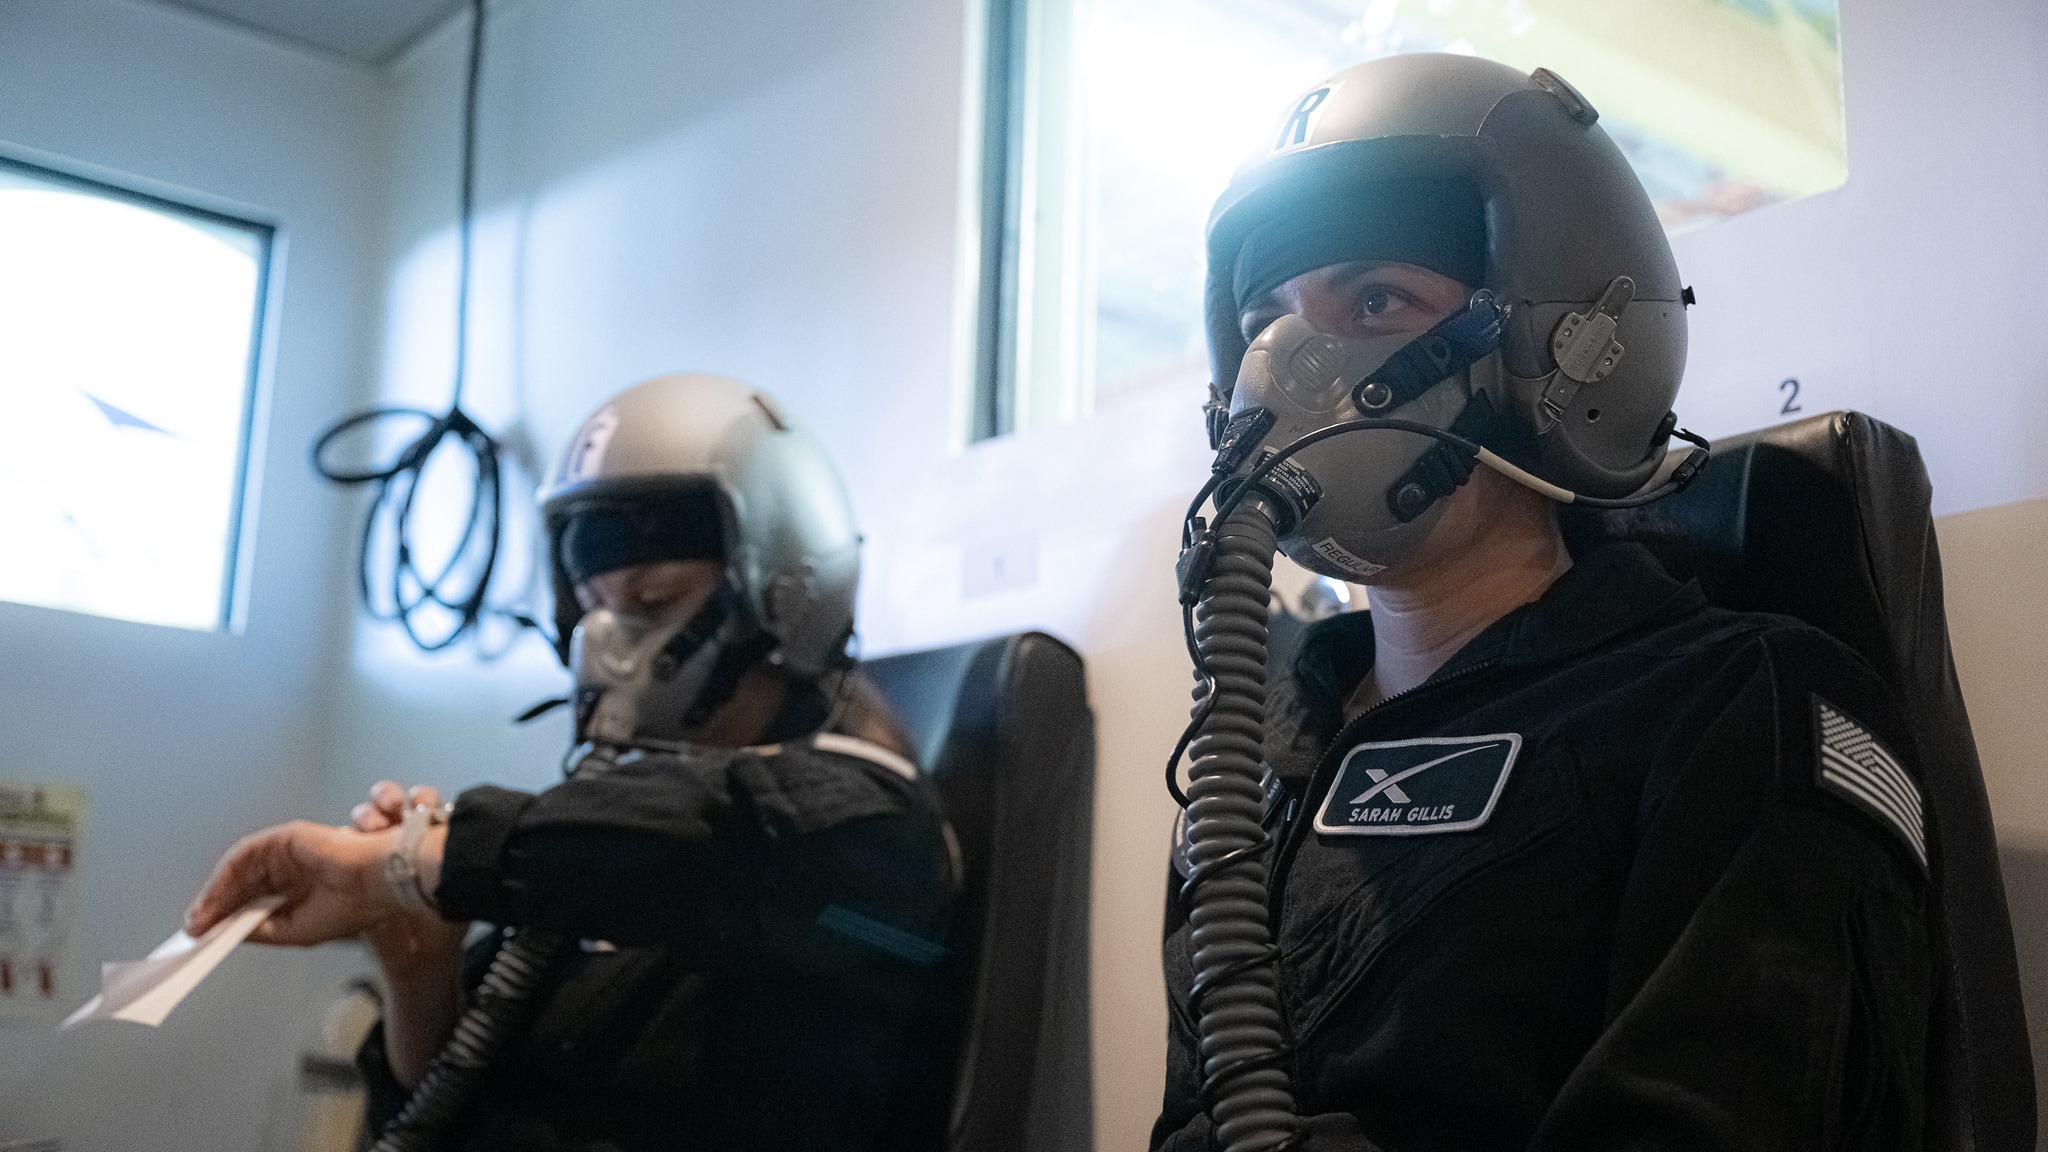 two people in black outfits and helmets doing flight training in a room